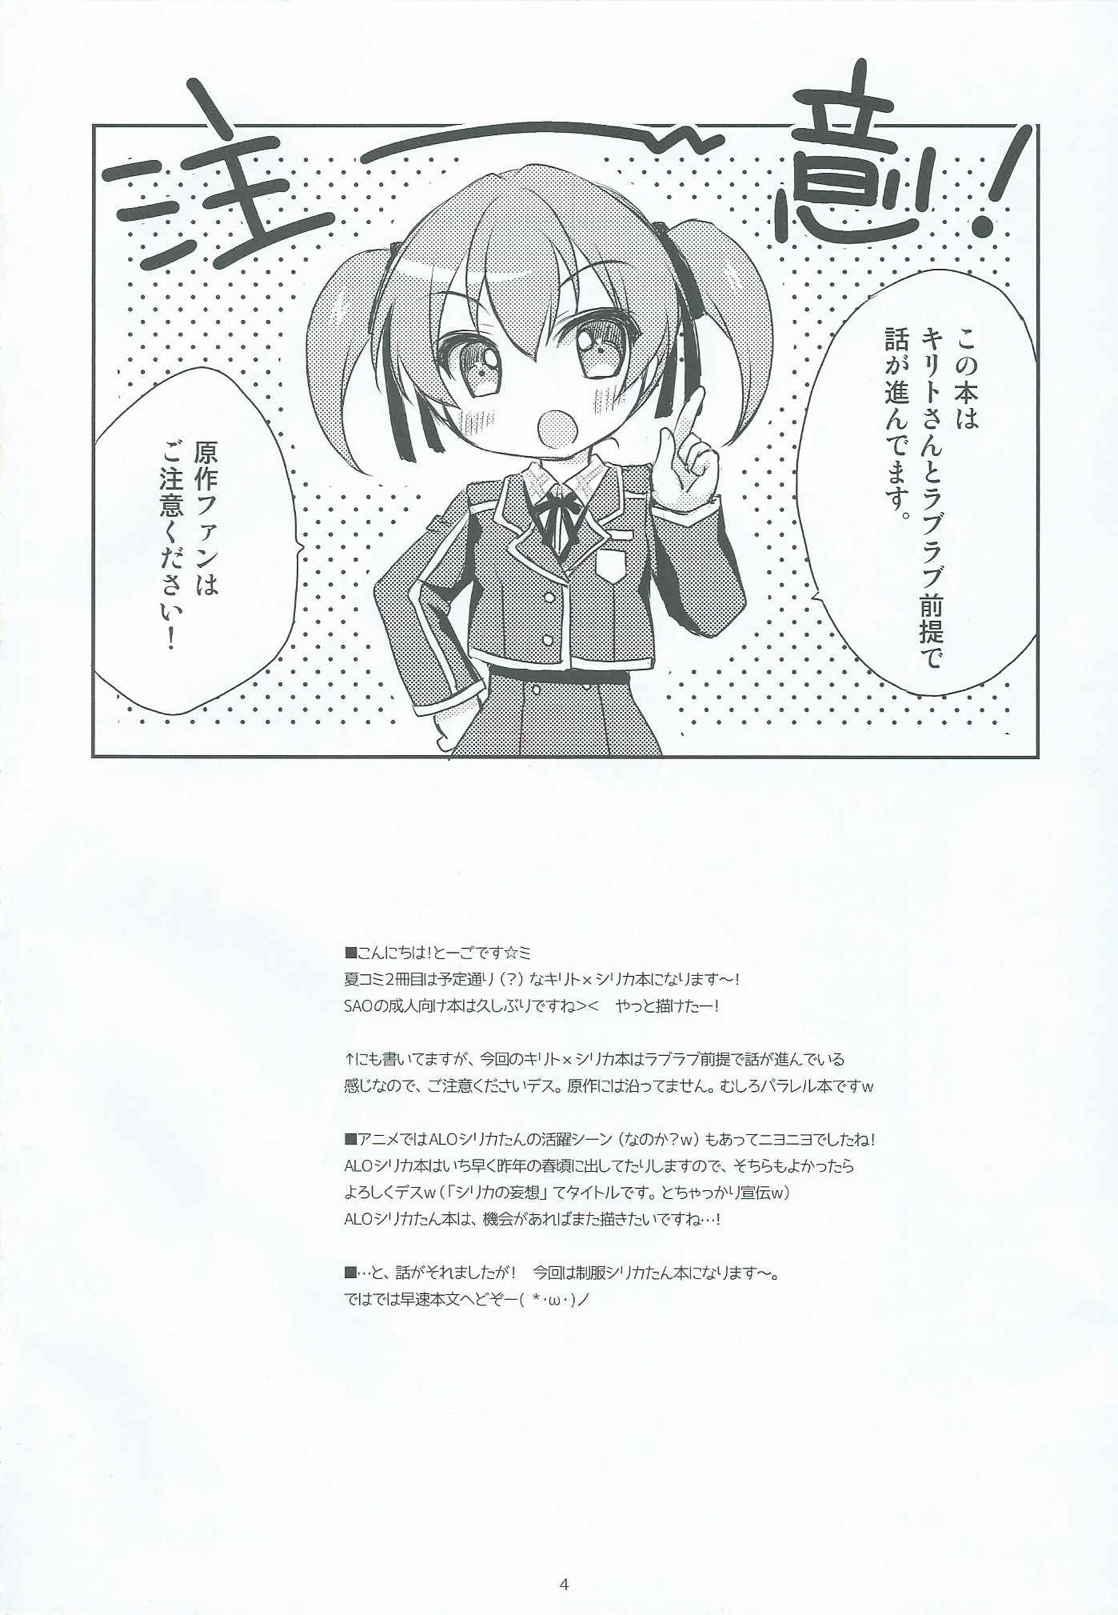 Pain Itazura Silica-chan - Sword art online Fingers - Page 2